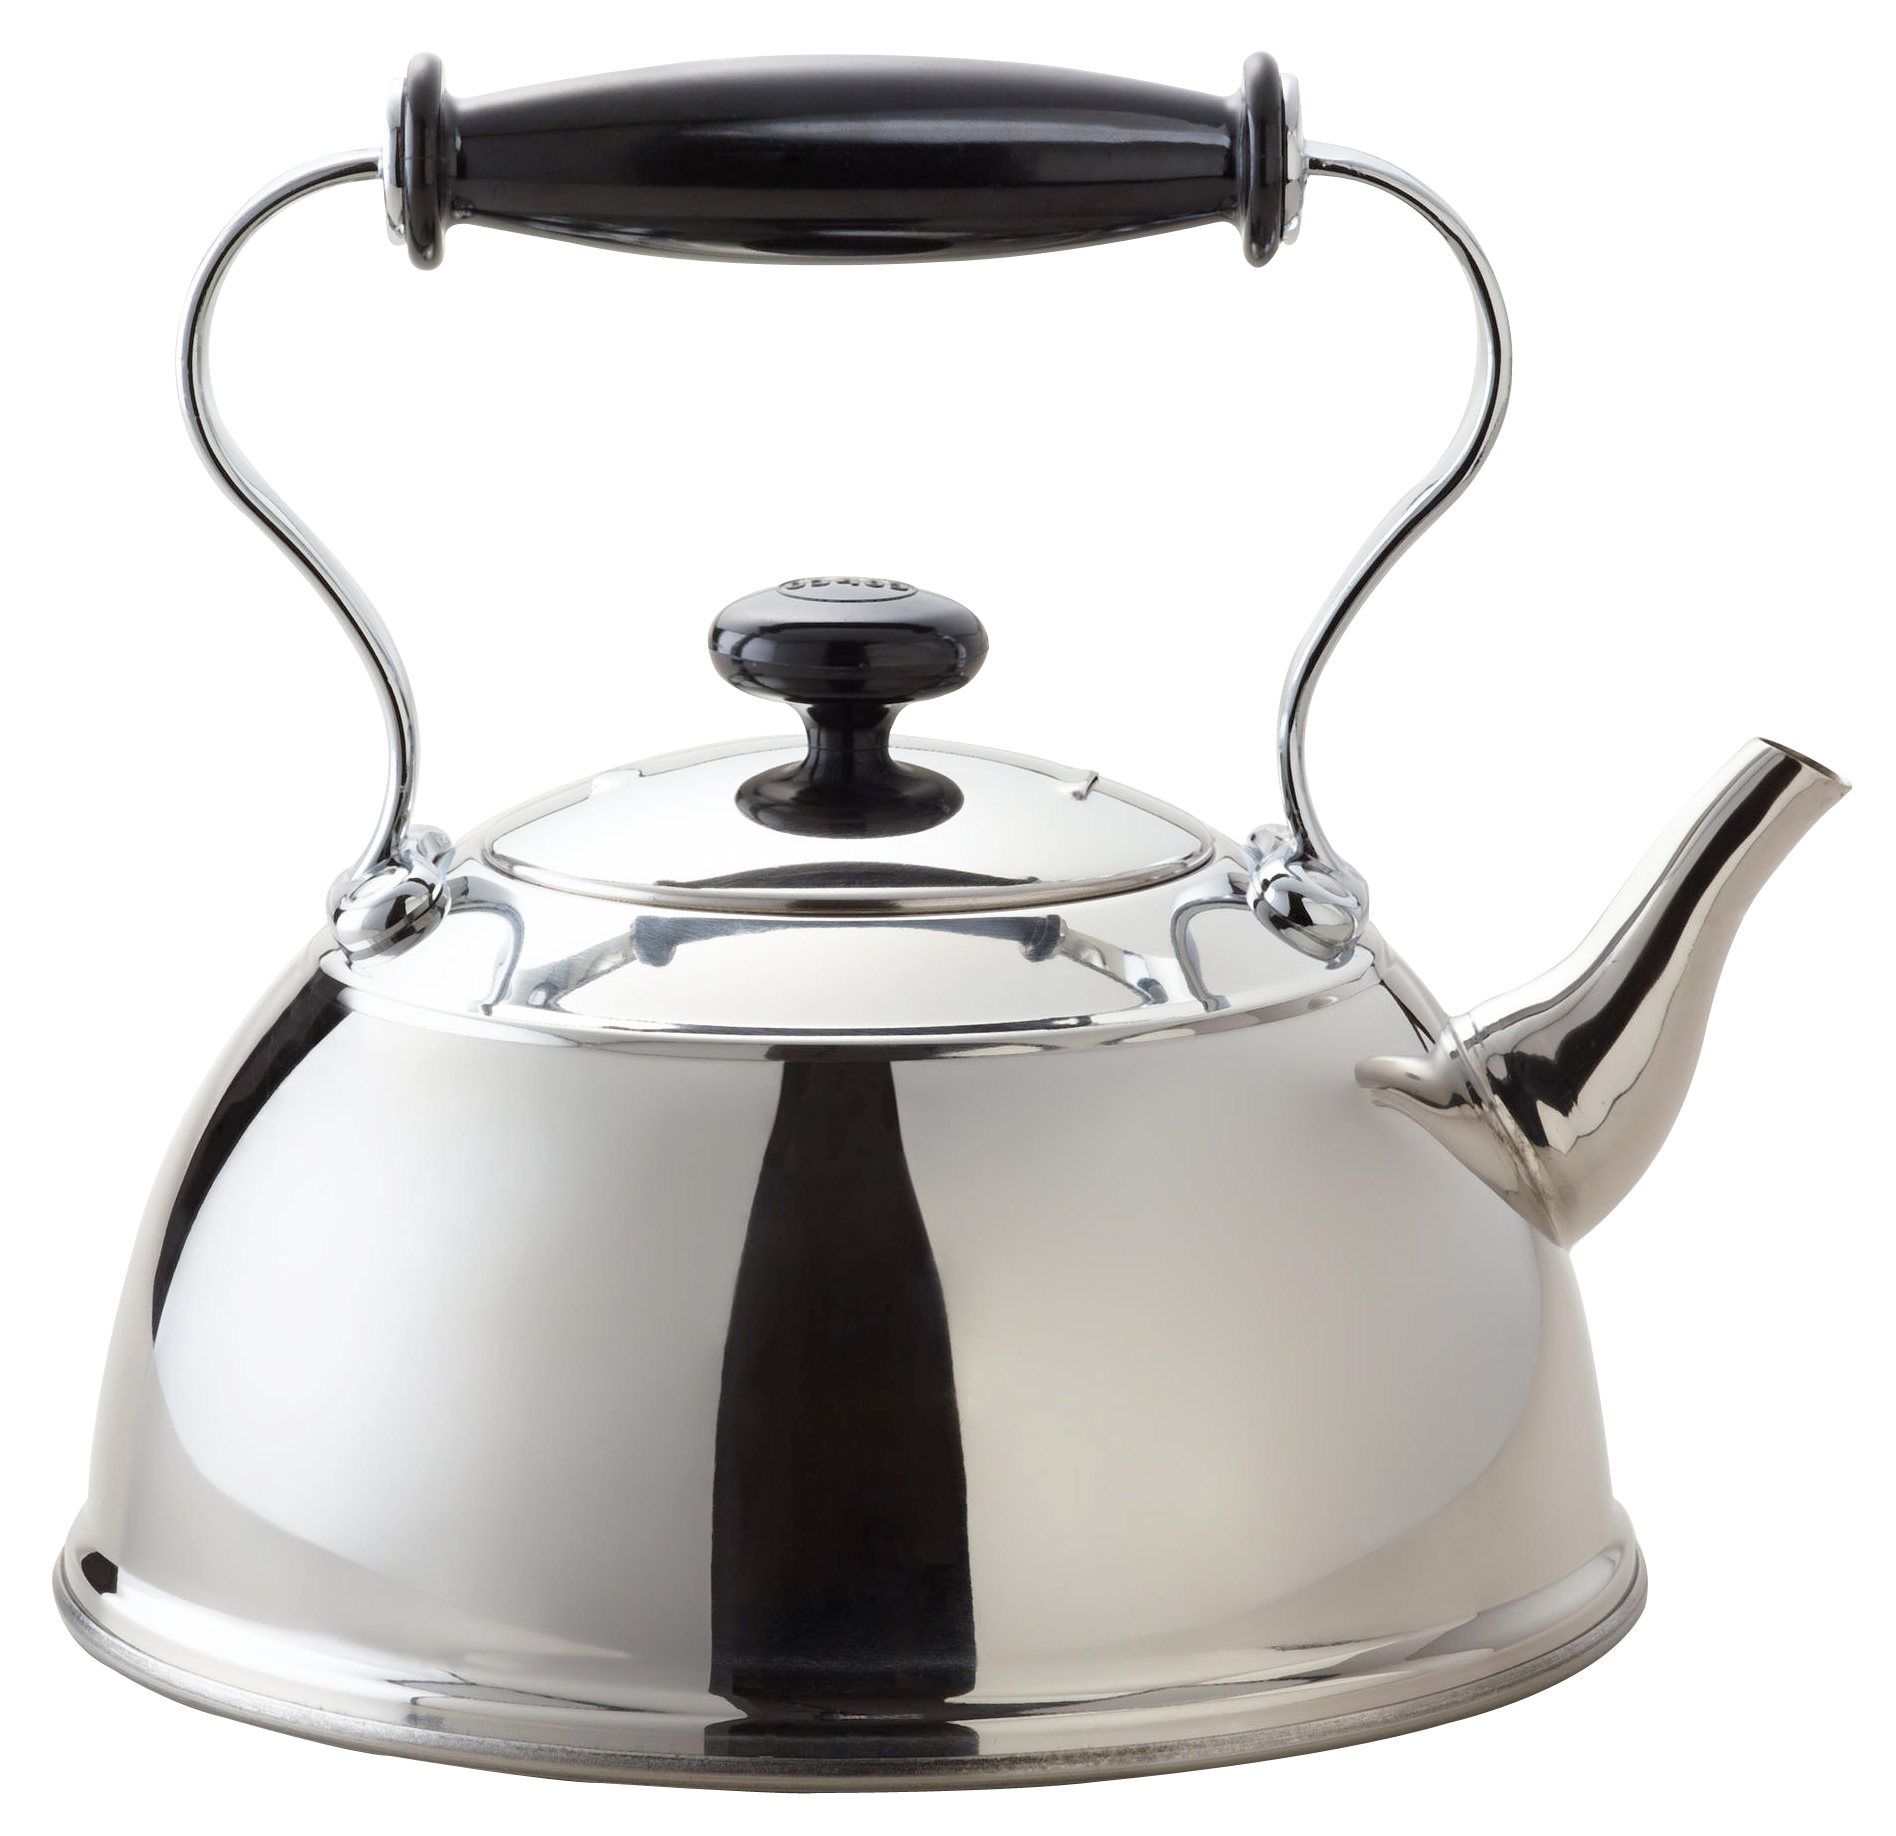 Kettle Silver Free HQ Image PNG Image